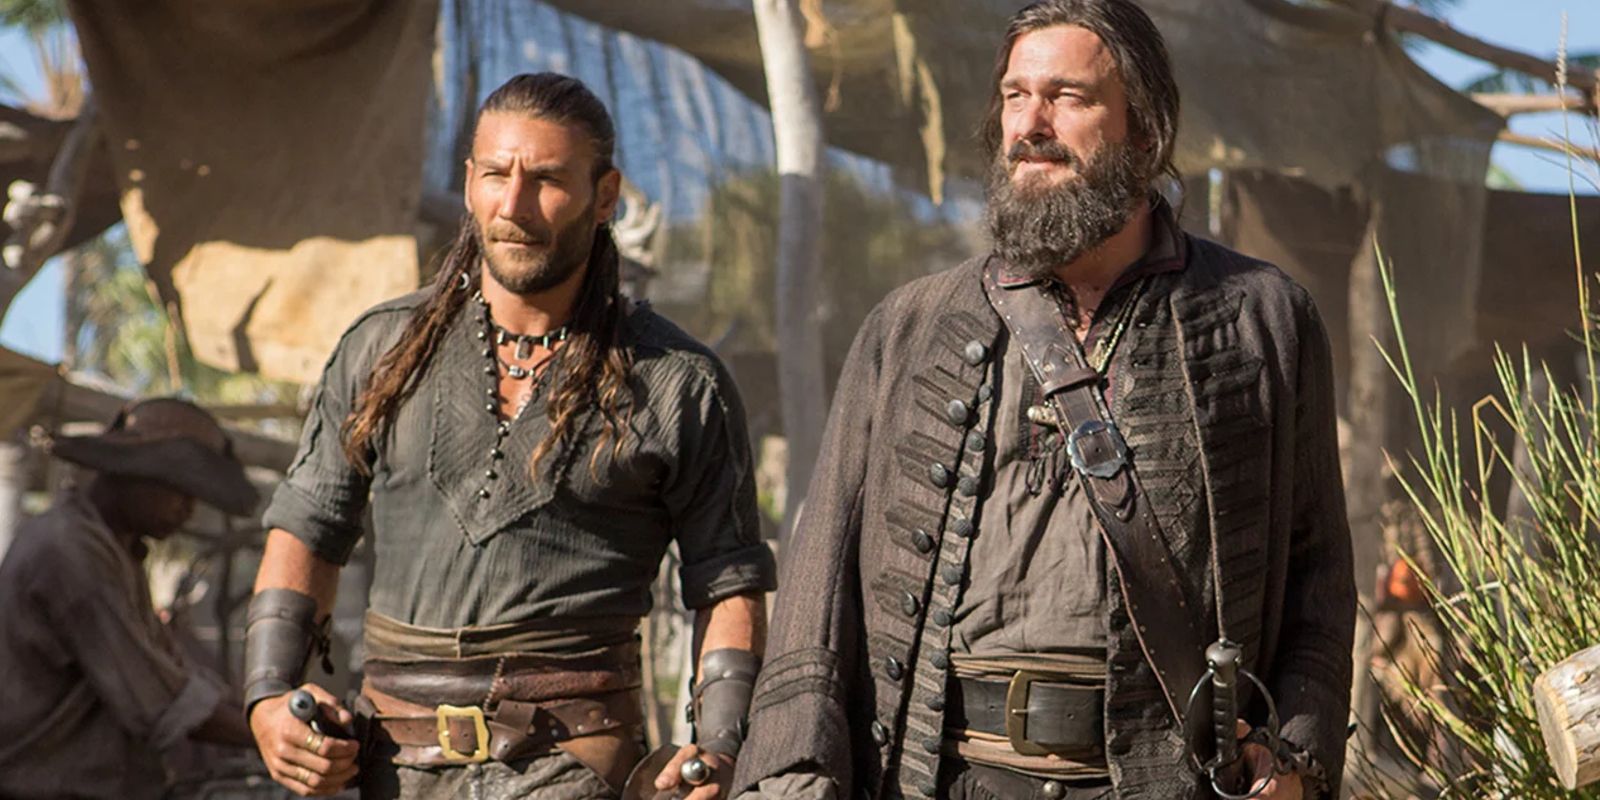 Why Black Sails Season 5 Isn't Happening & What It Would've Been About